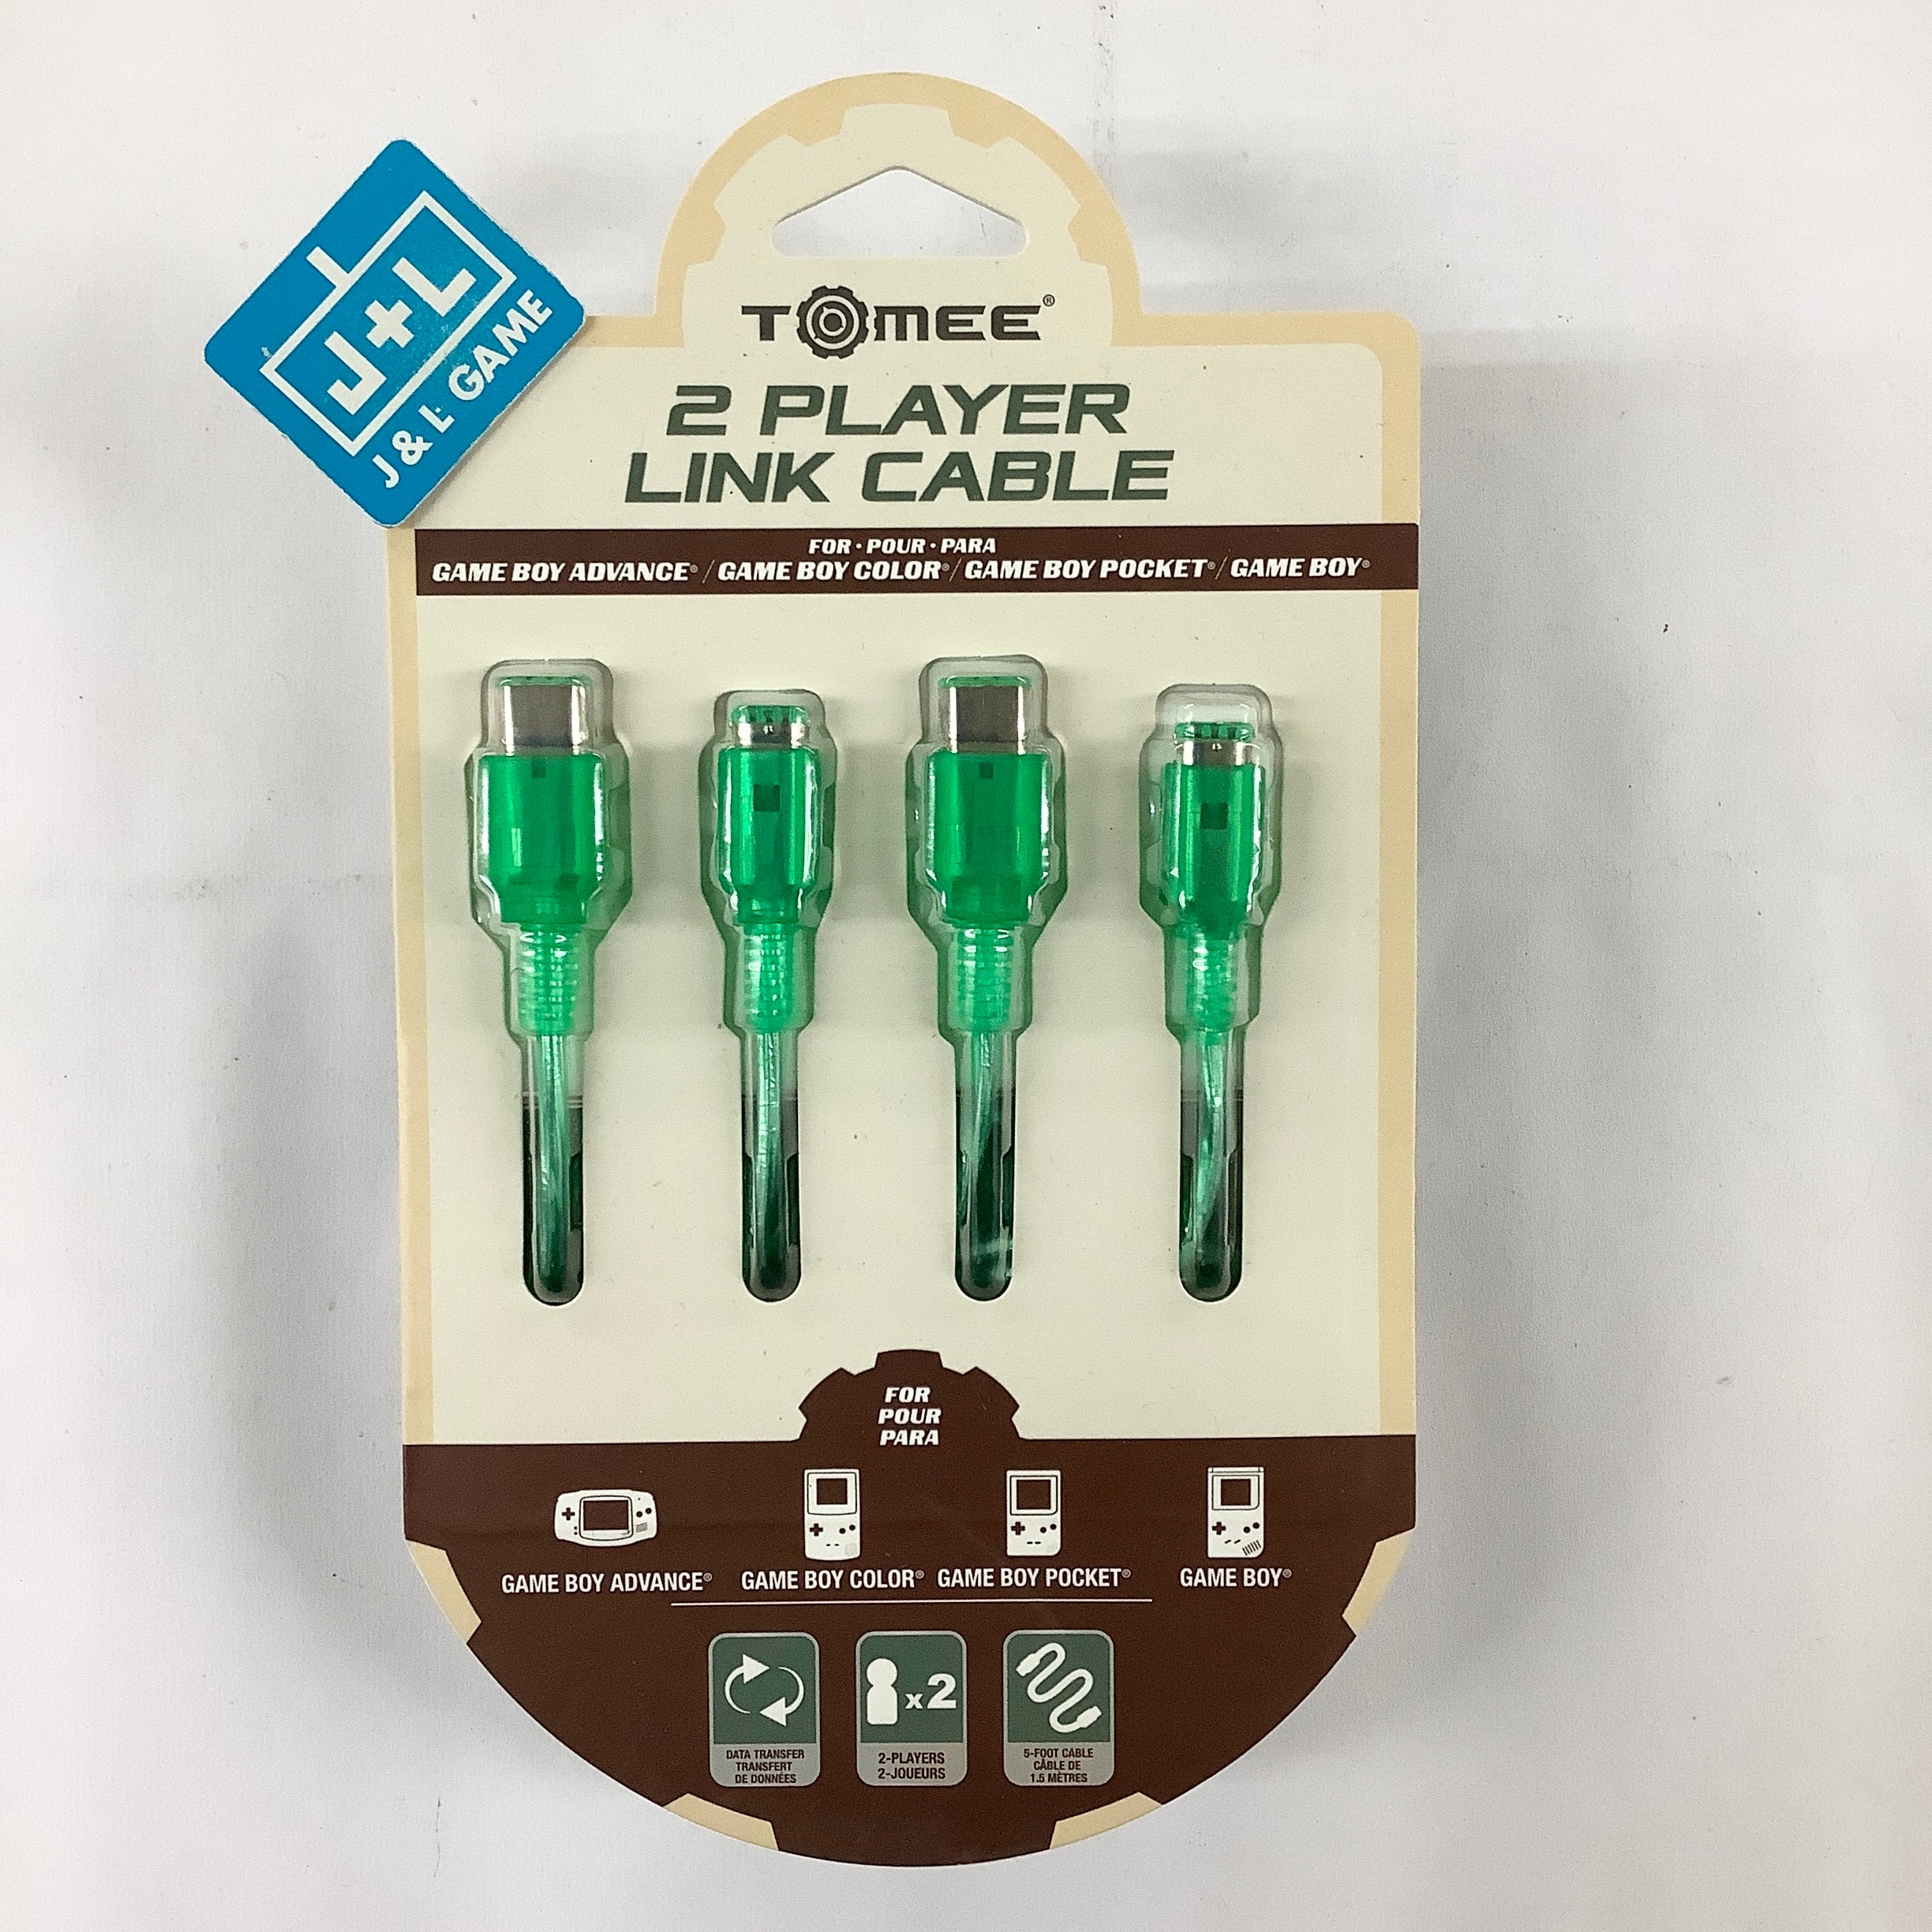 Tomee 2 Player Link Cable - (GBC) Game Boy Color Accessories Tomee   